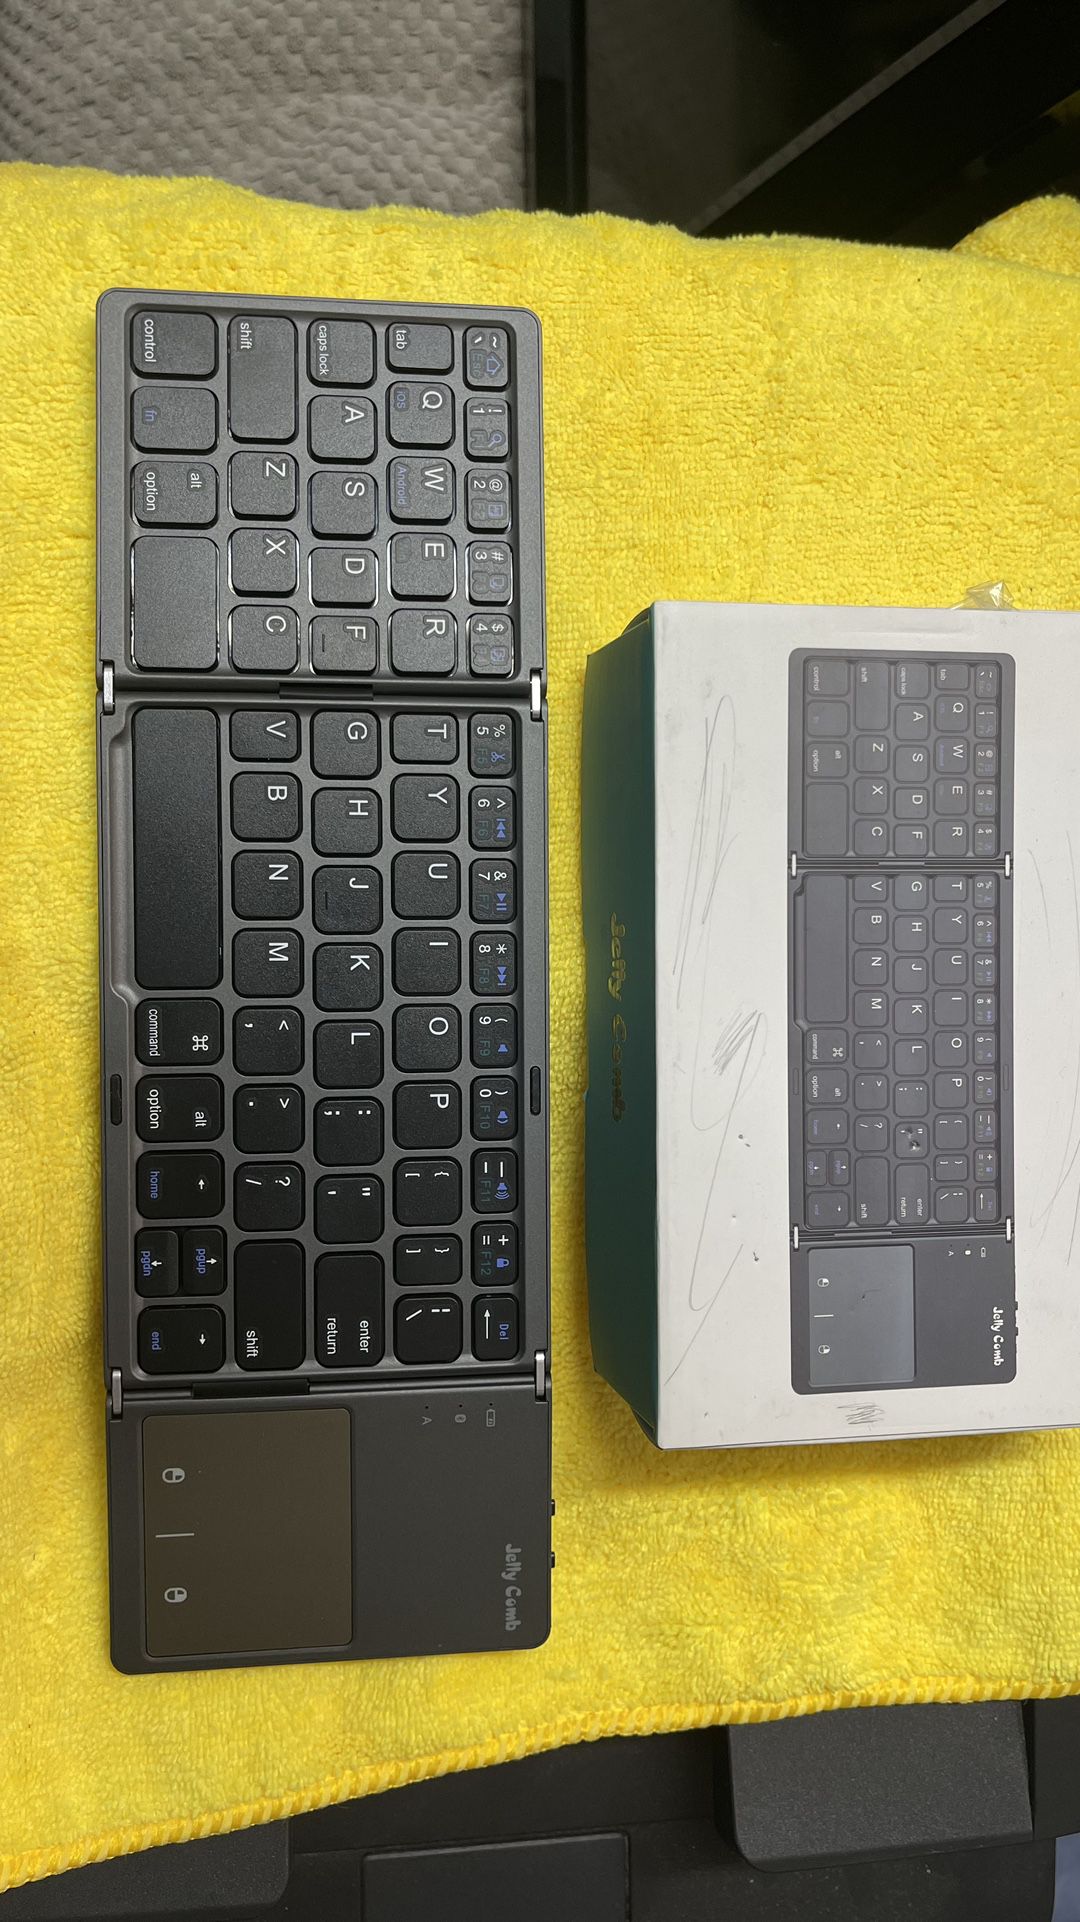 Mini wireless keyboard for your phone and more